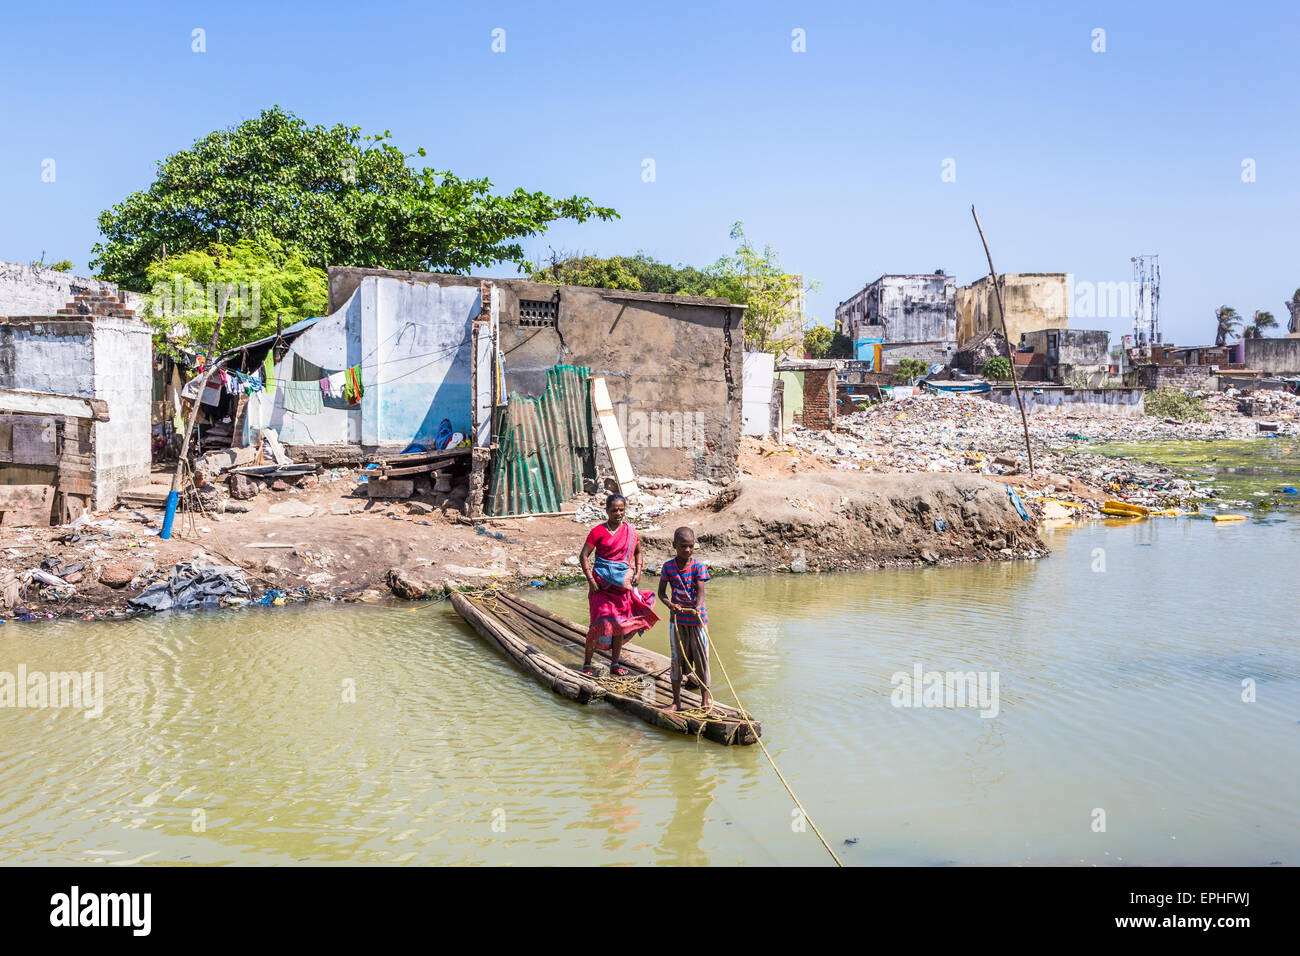 Boy operating a makeshift wooden ferry across the Adyar River in slums on the ocean shore, Chennai, Tamil Nadu, southern India Stock Photo